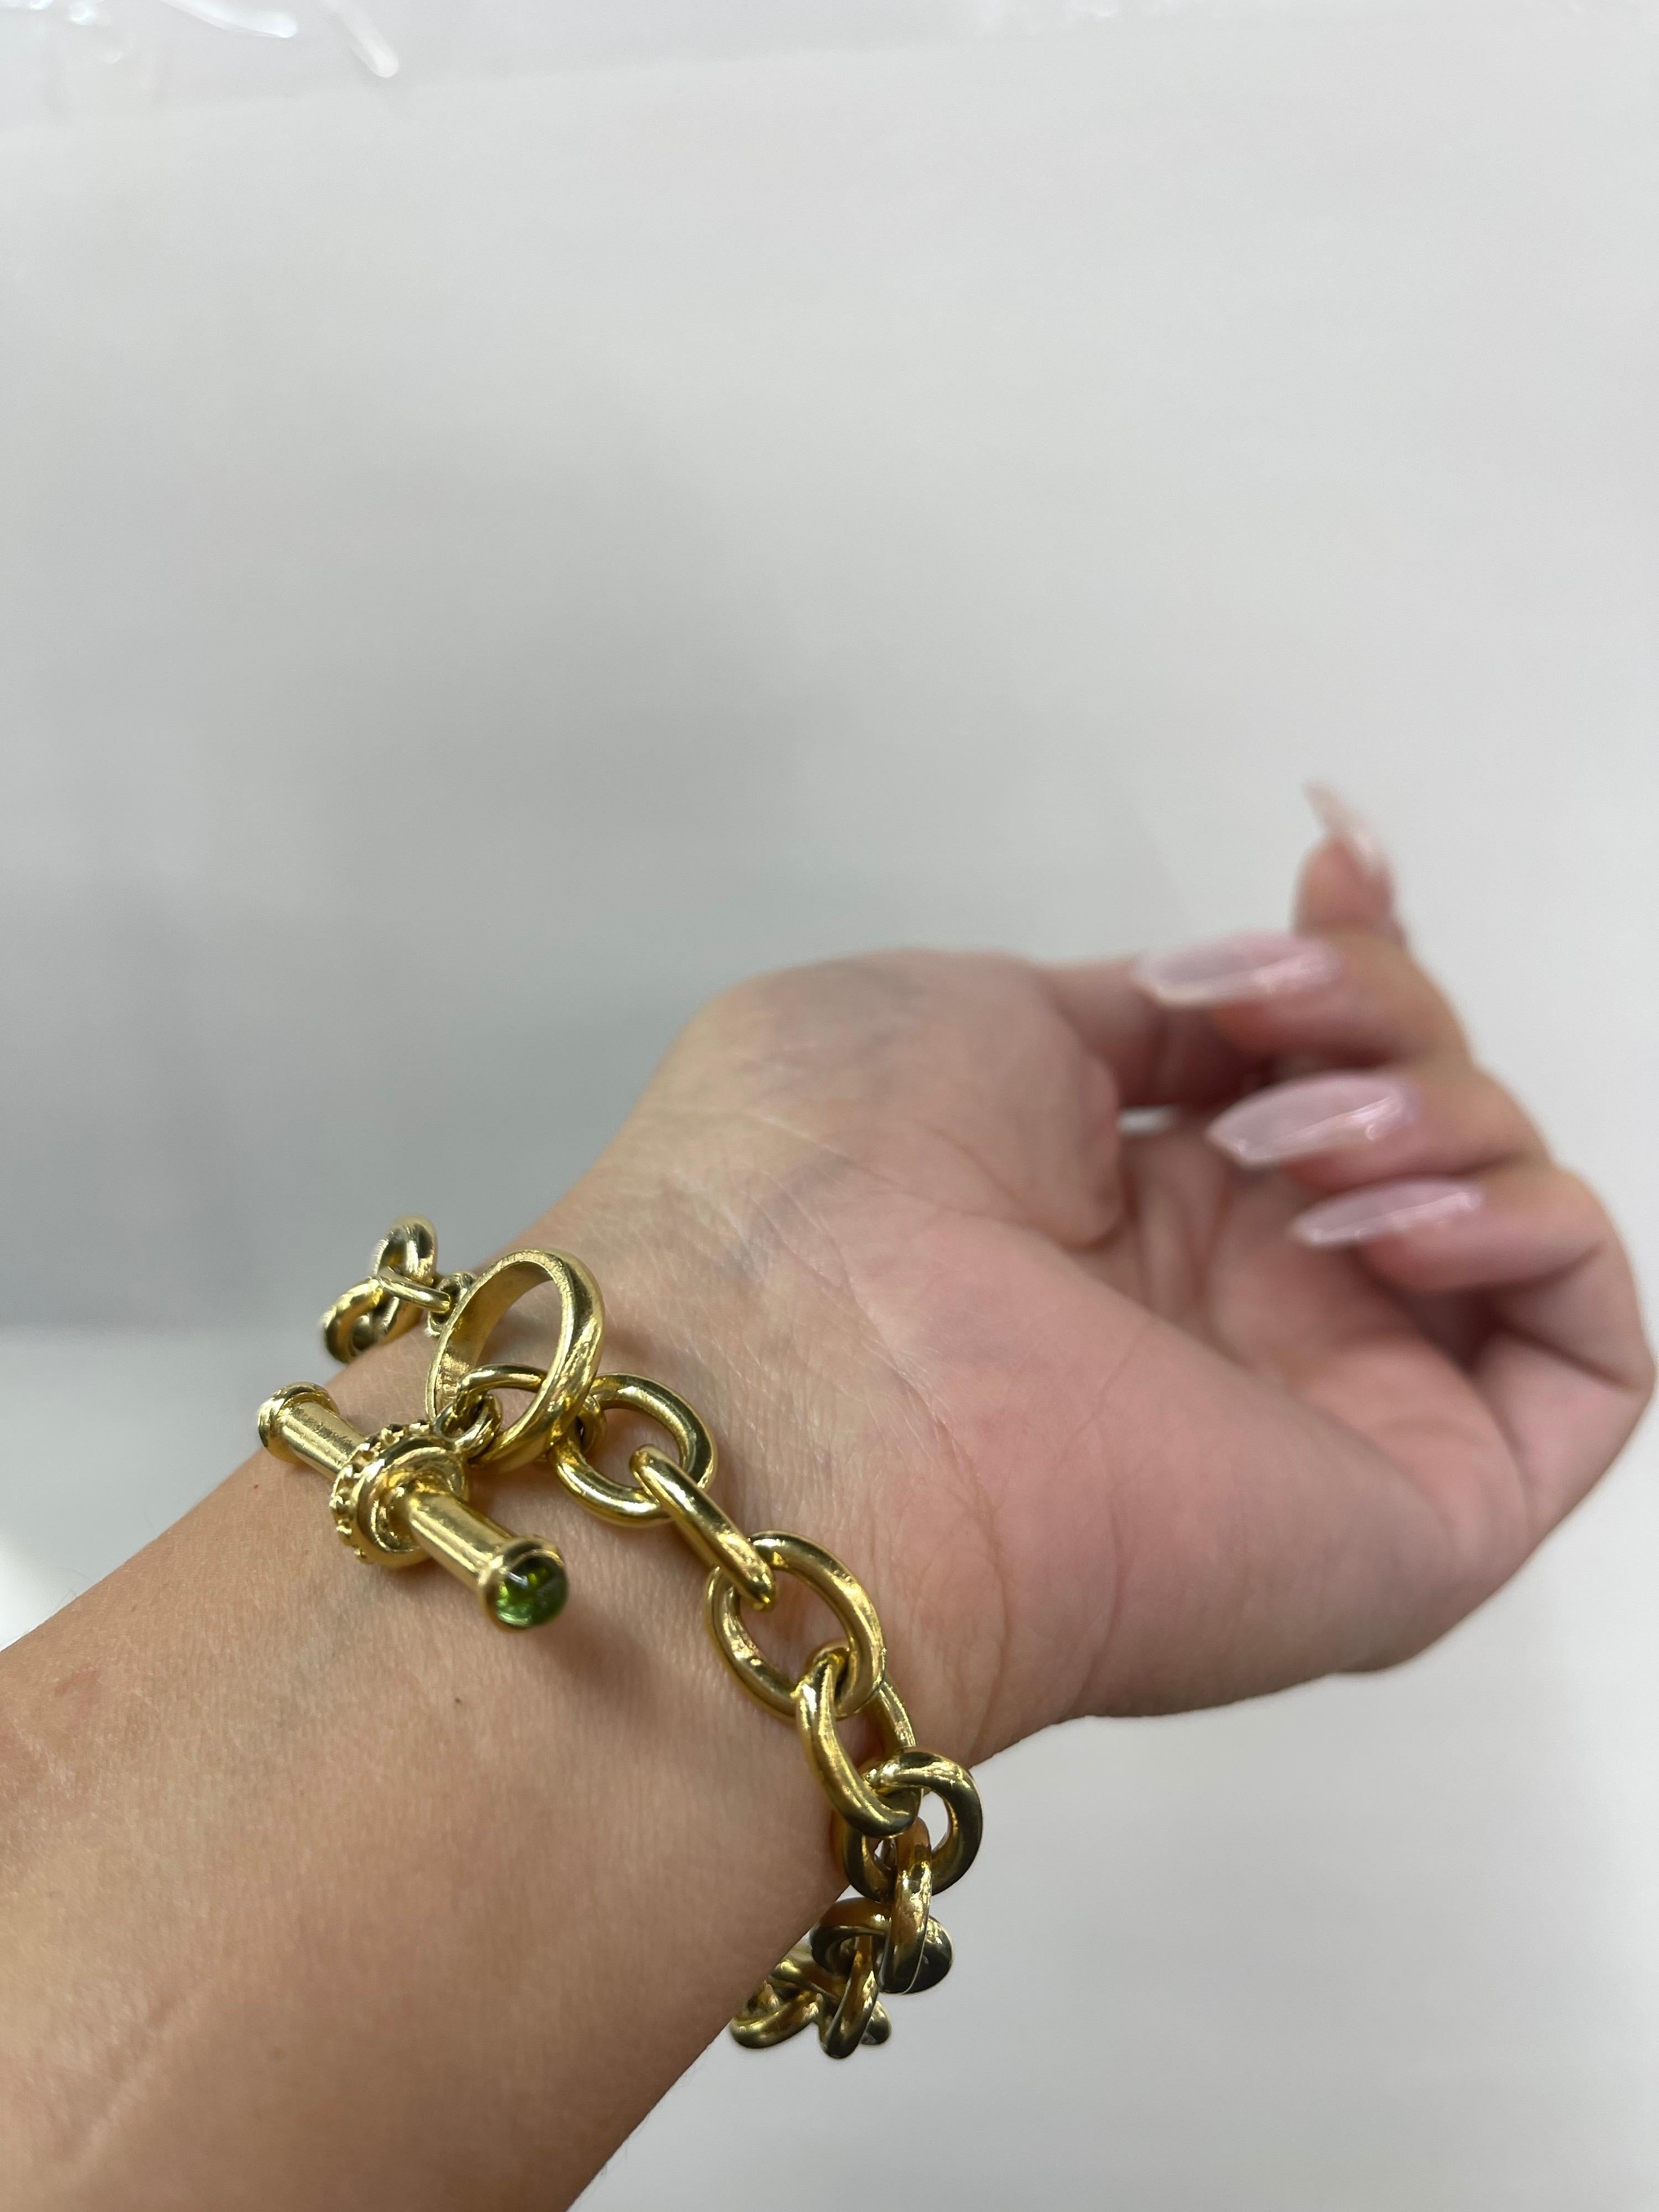 18 Karat Yellow Gold Cable Bracelet and Peridot Signed Vahe Naltchayan USA For Sale 2